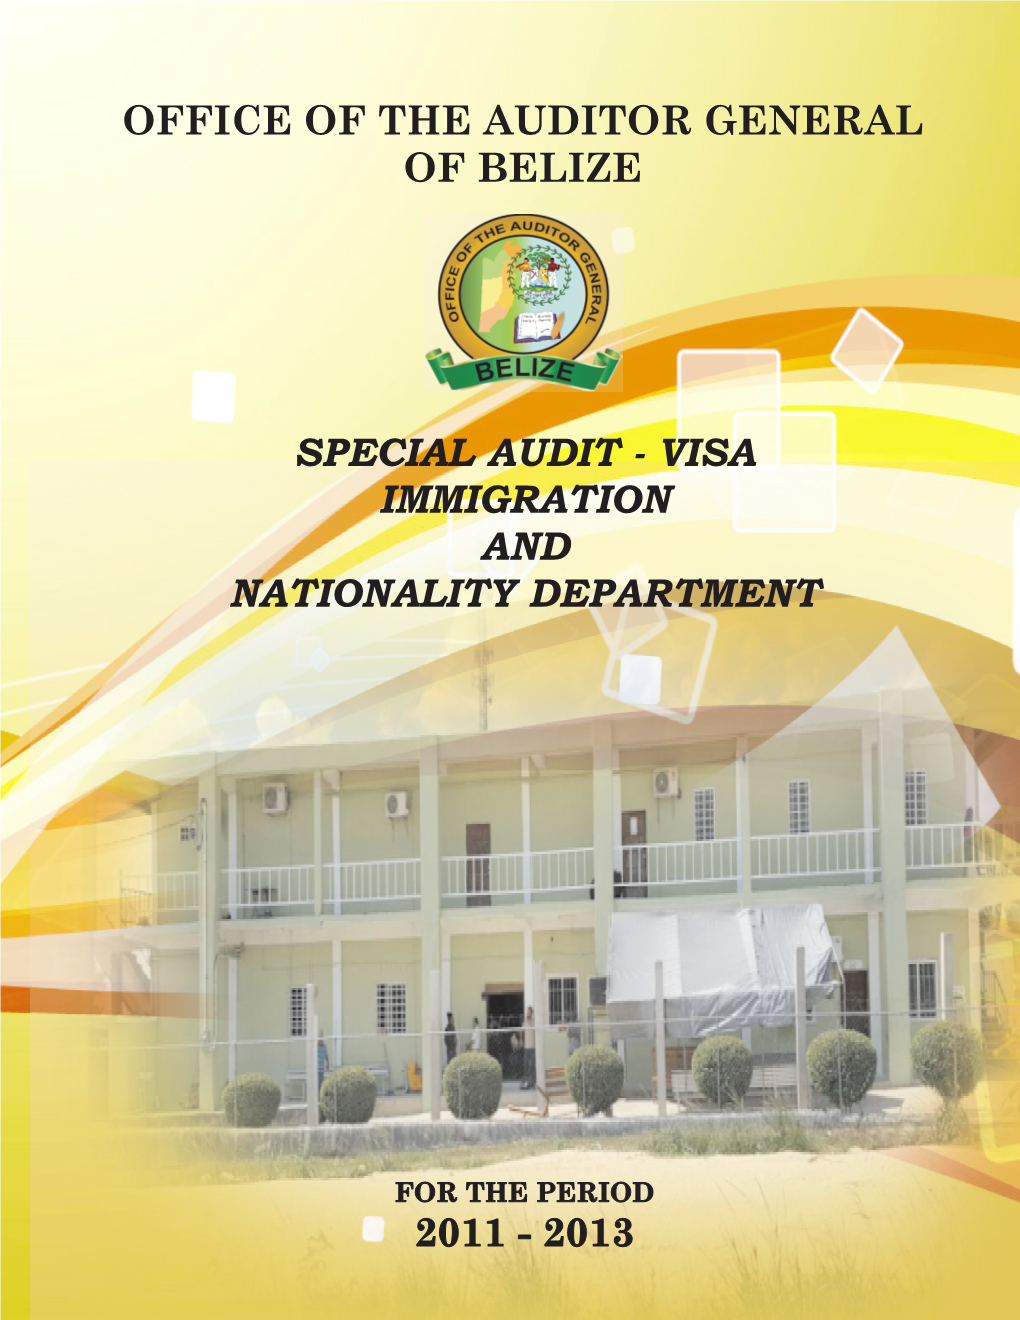 Visa Immigration and Nationality Department 2011